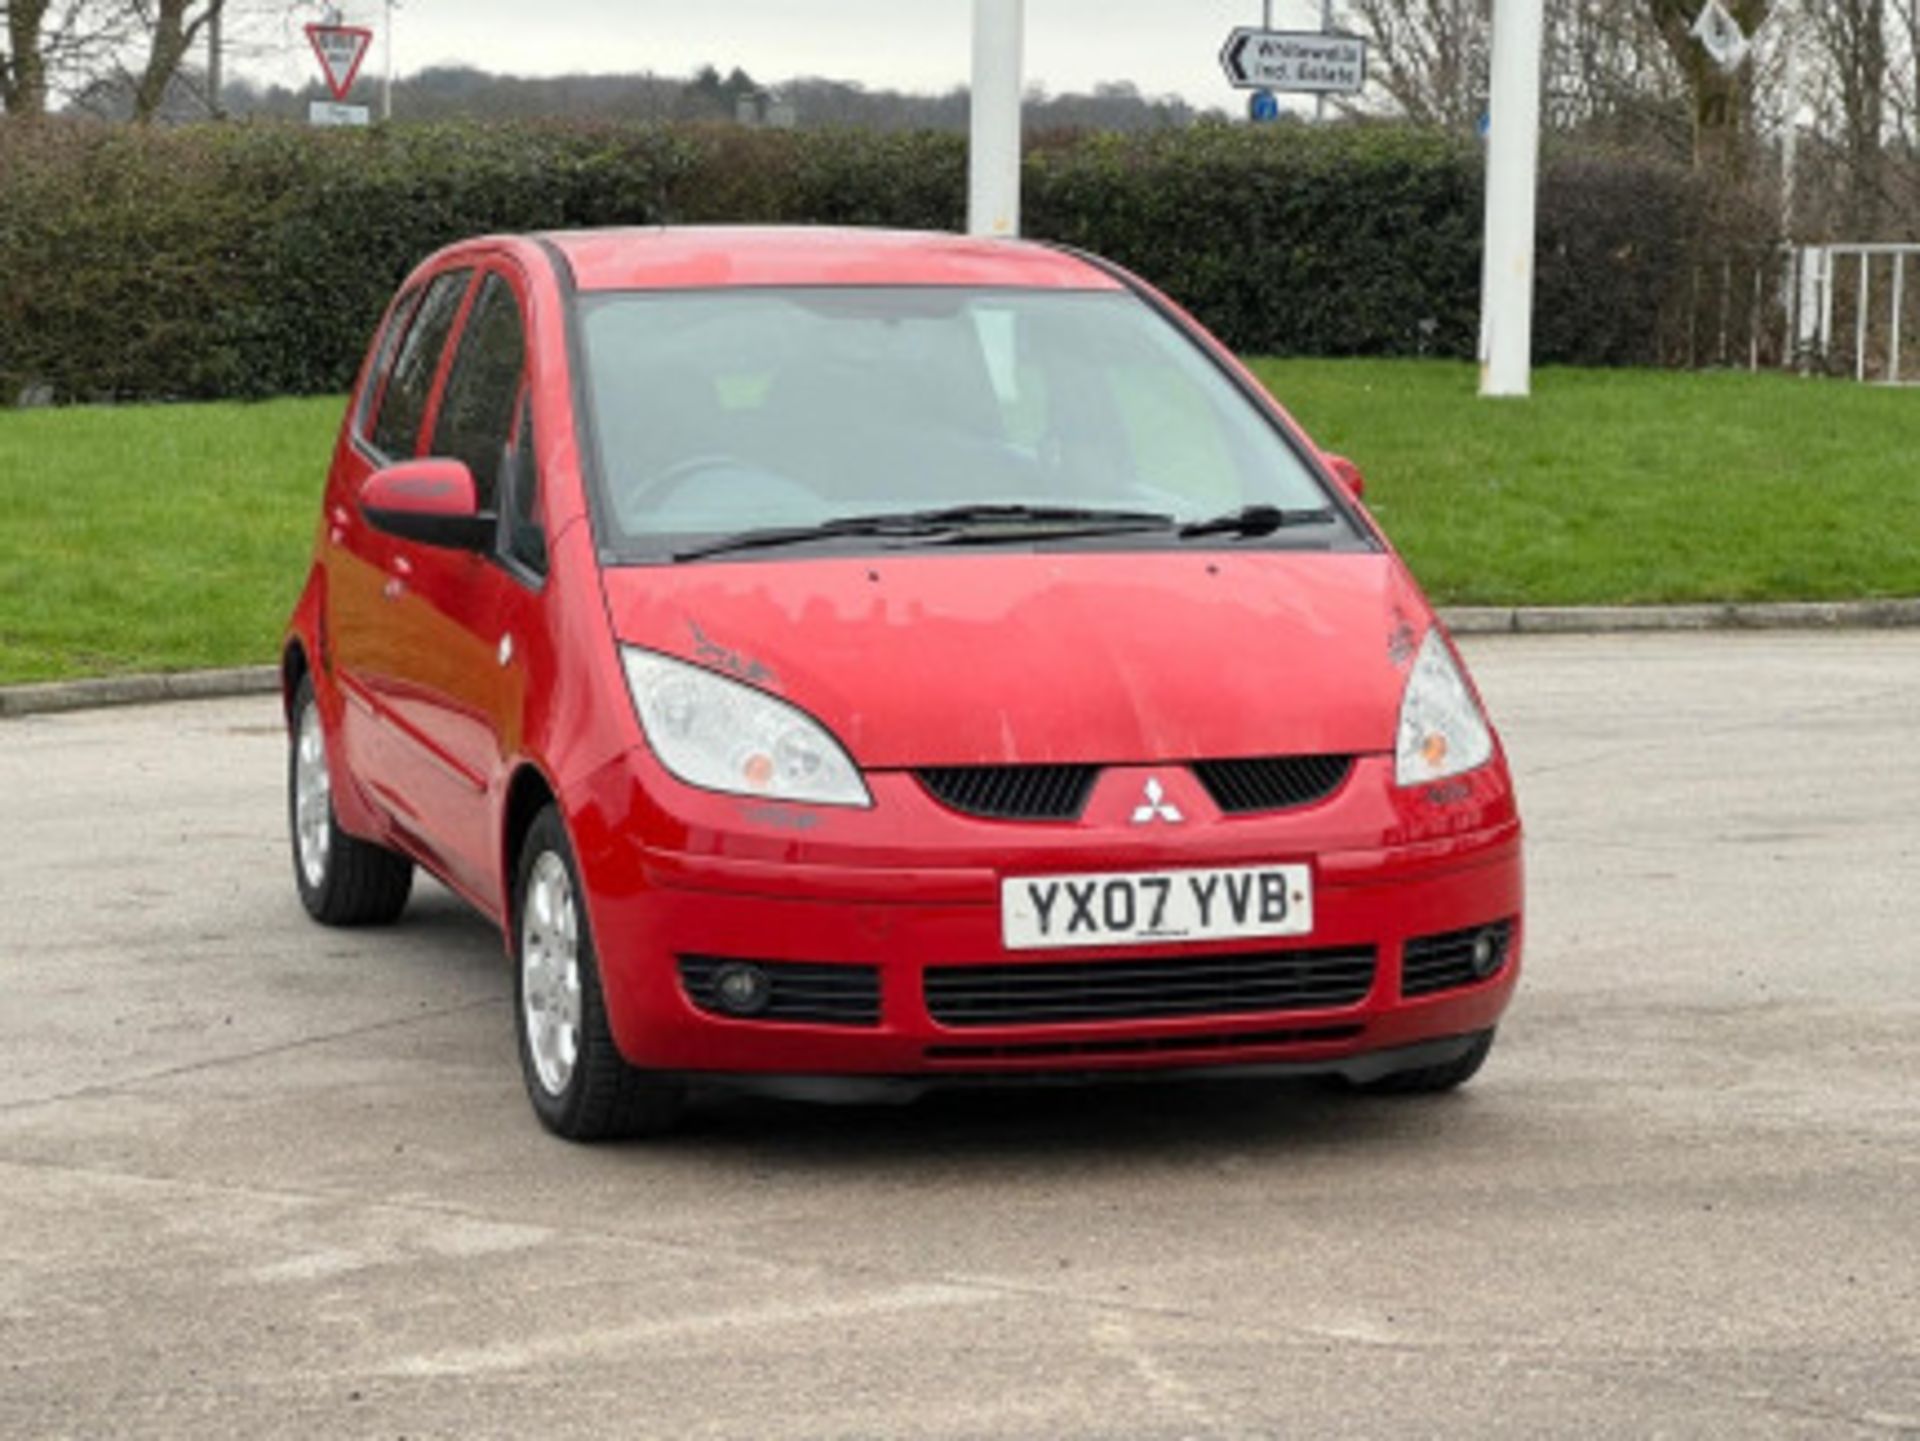 2007 MITSUBISHI COLT 1.5 DI-D DIESEL AUTOMATIC >>--NO VAT ON HAMMER--<< - Image 60 of 127